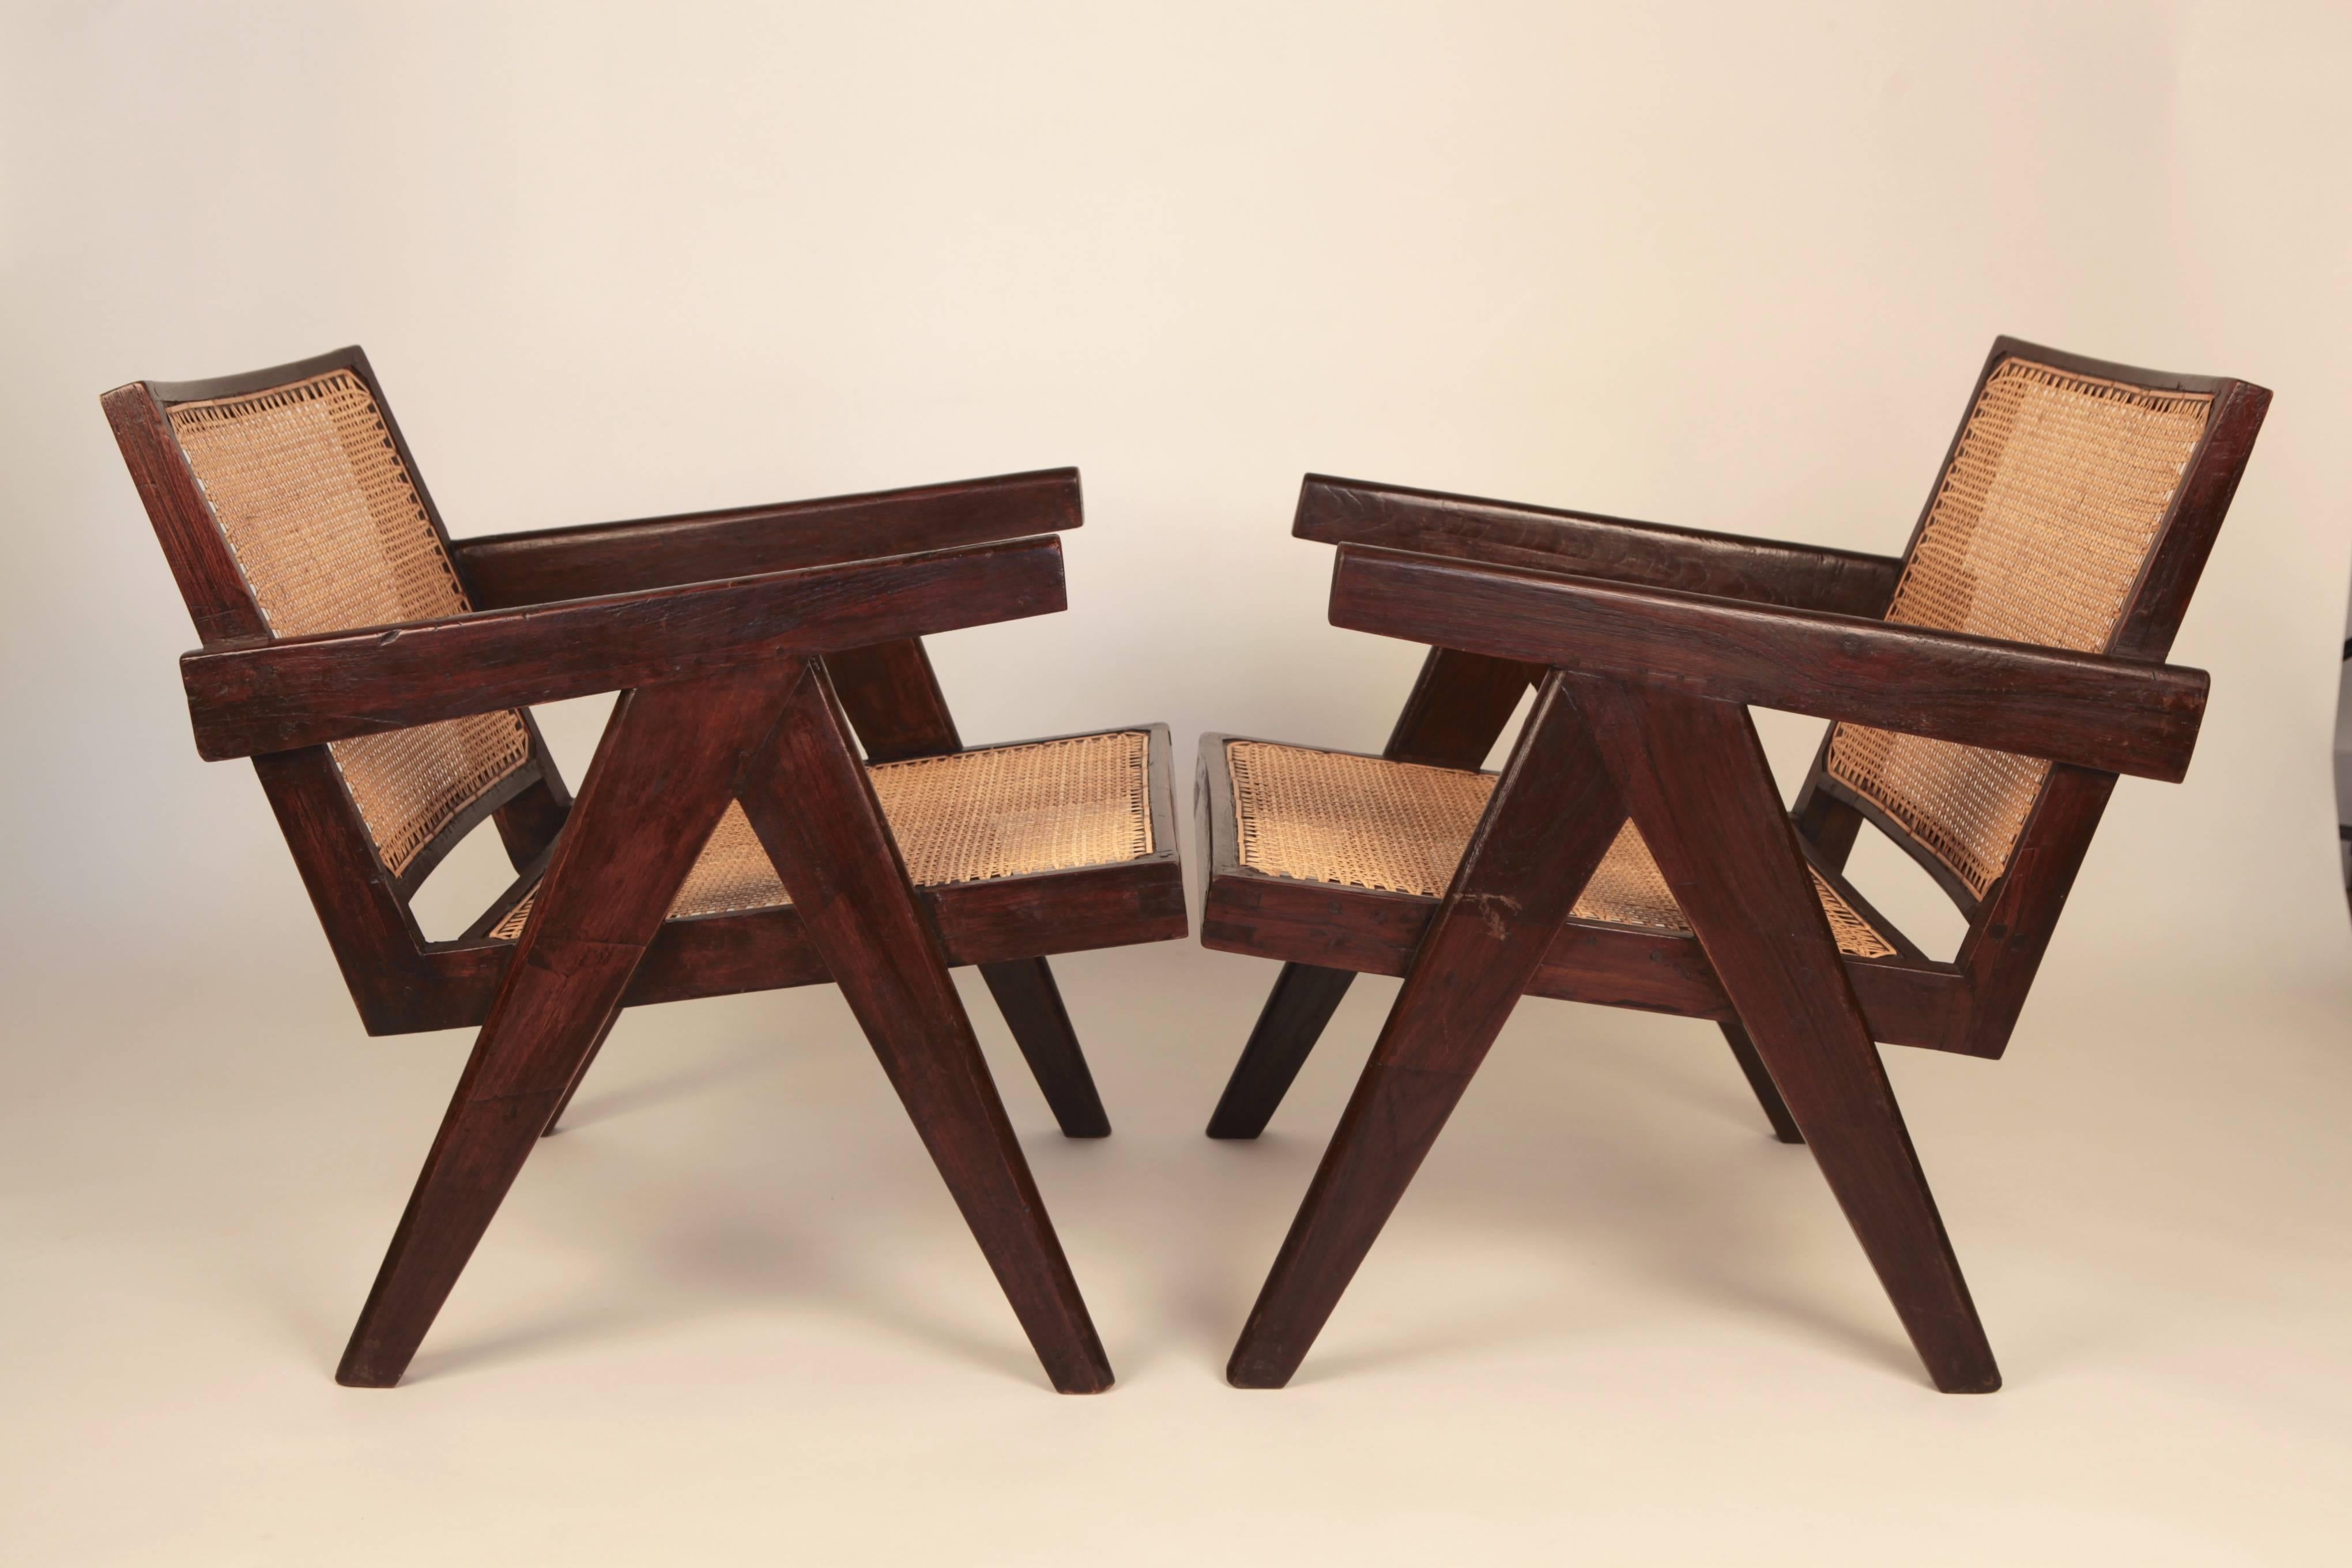 Stained Pierre Jeanneret, Pair of Easy Armchairs, Chandigarh, India, 1955